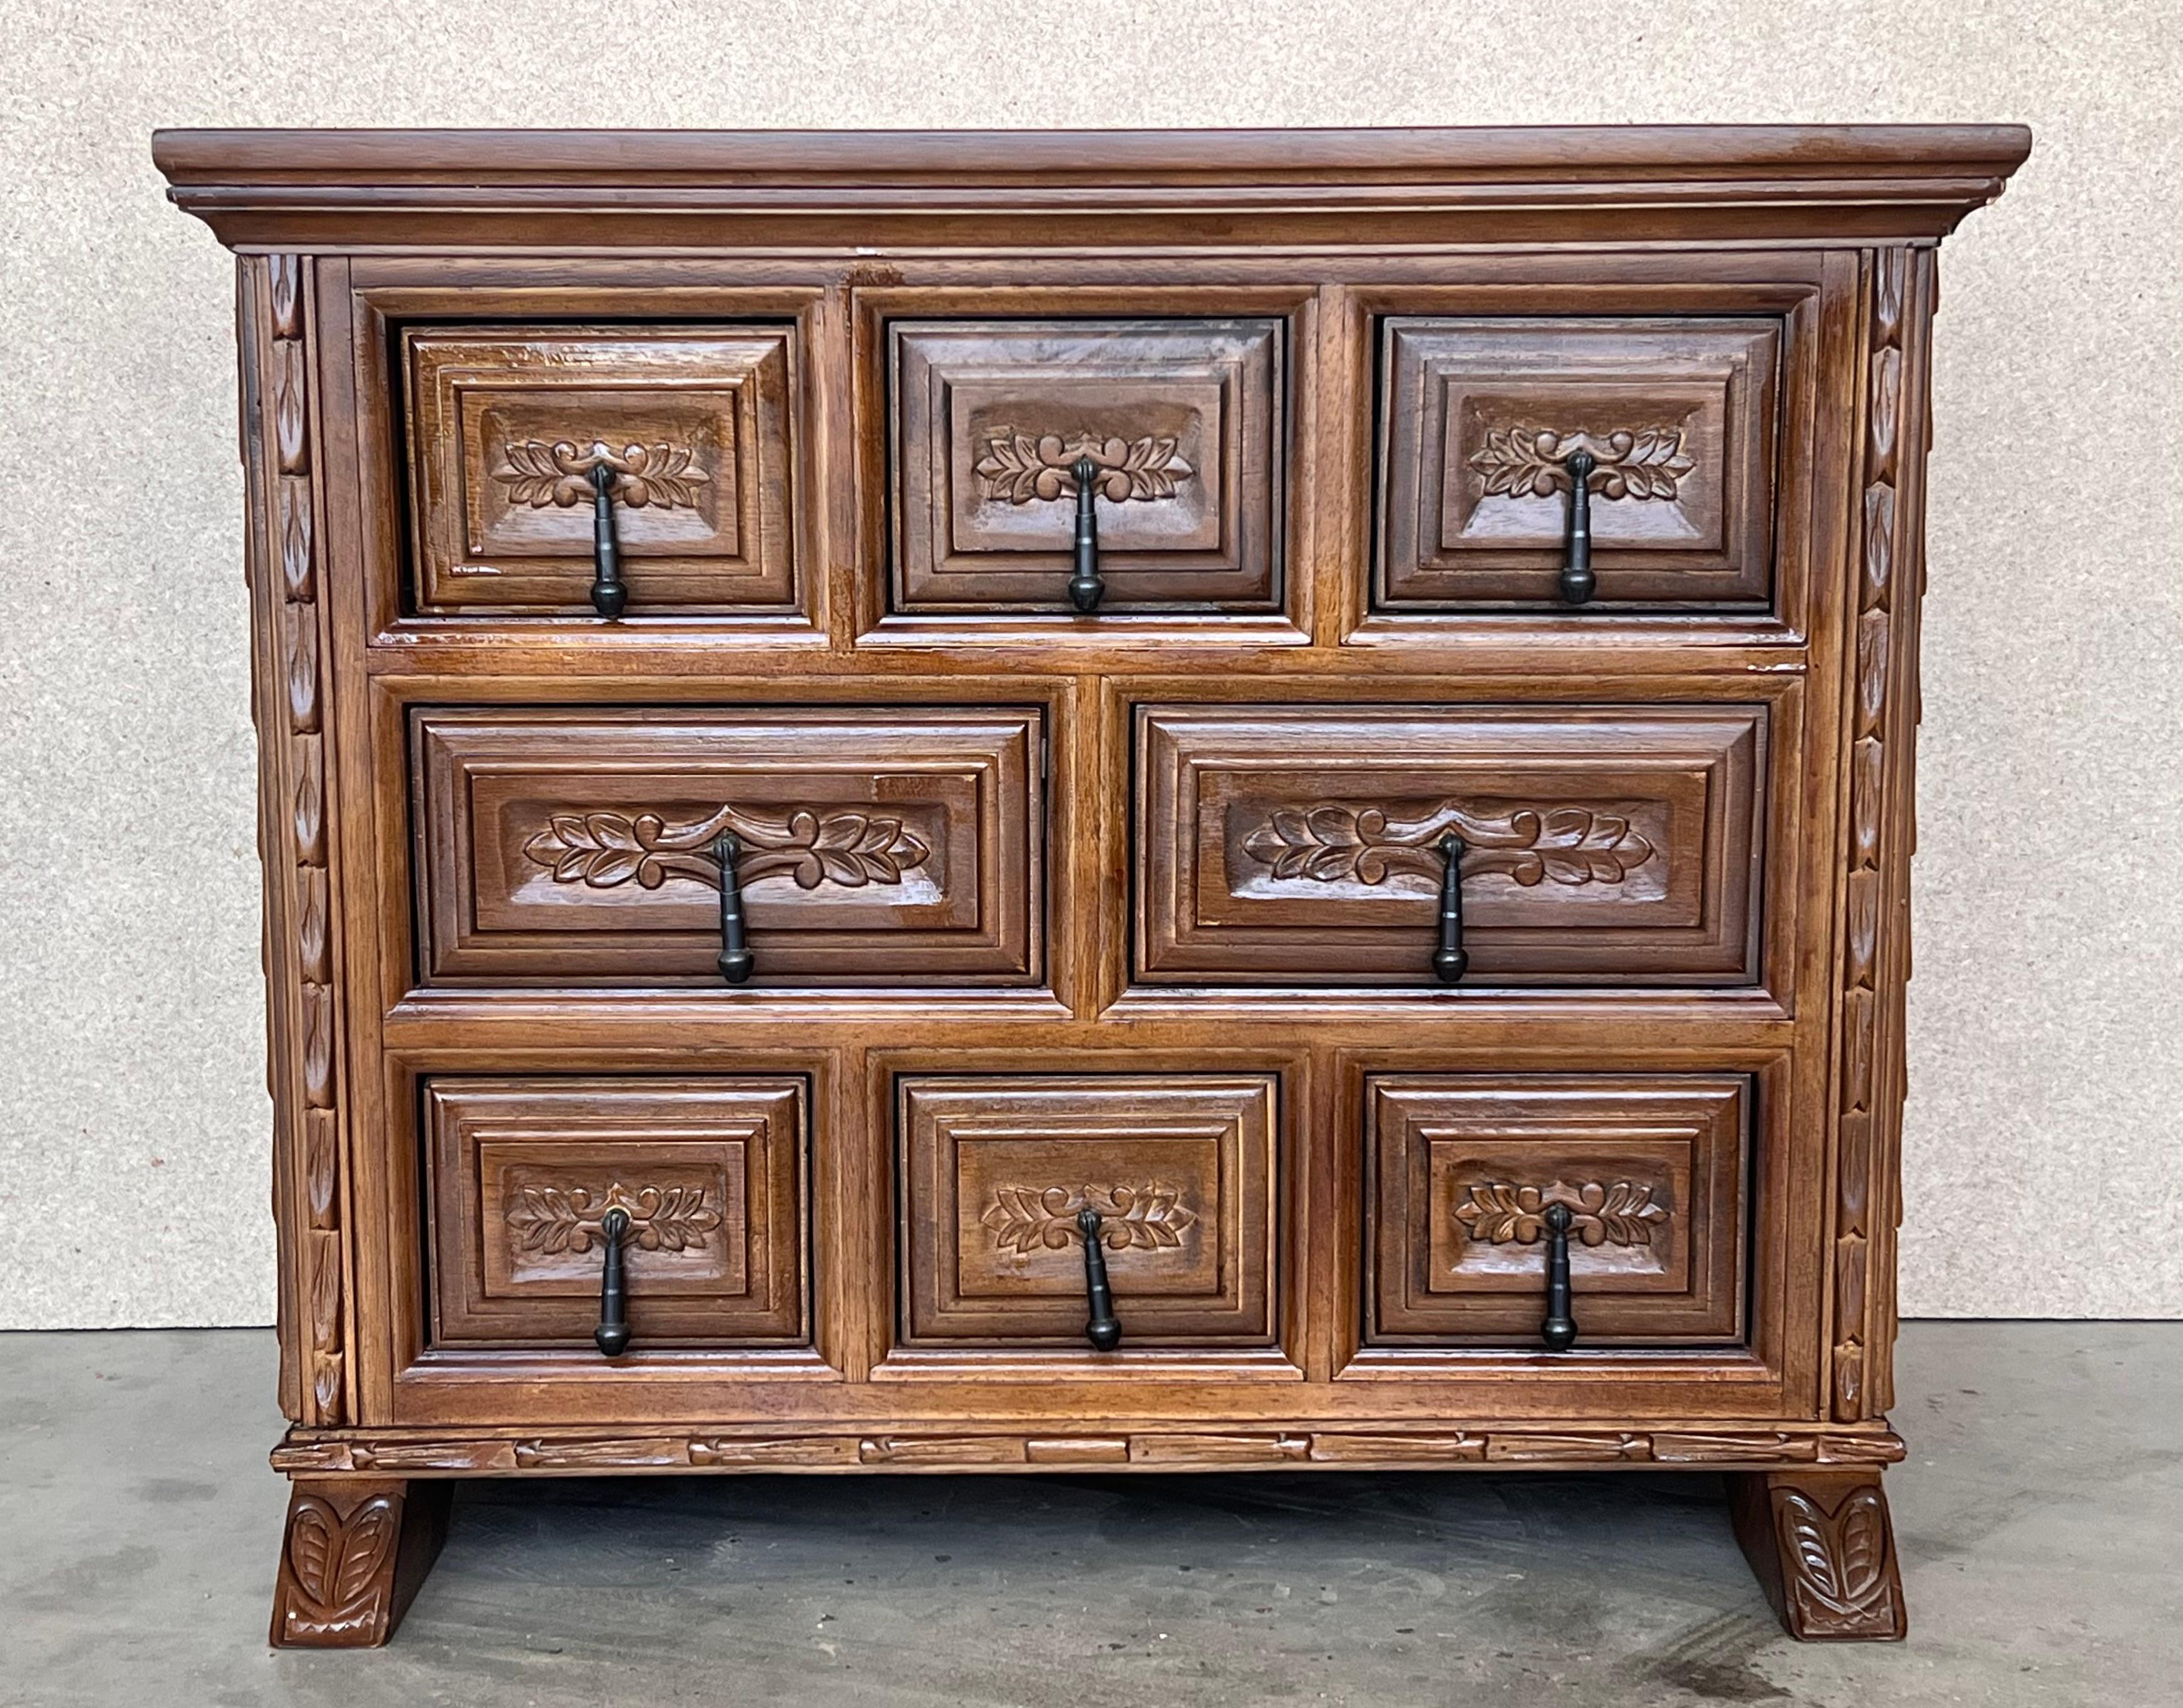 From Northern Spain, constructed of solid walnut, the rectangular top with molded edge atop a conforming case housing eight drawers paneled with solid walnut, raised on two plint legs.
Carved on the molding sides , drawers and legs of the front and